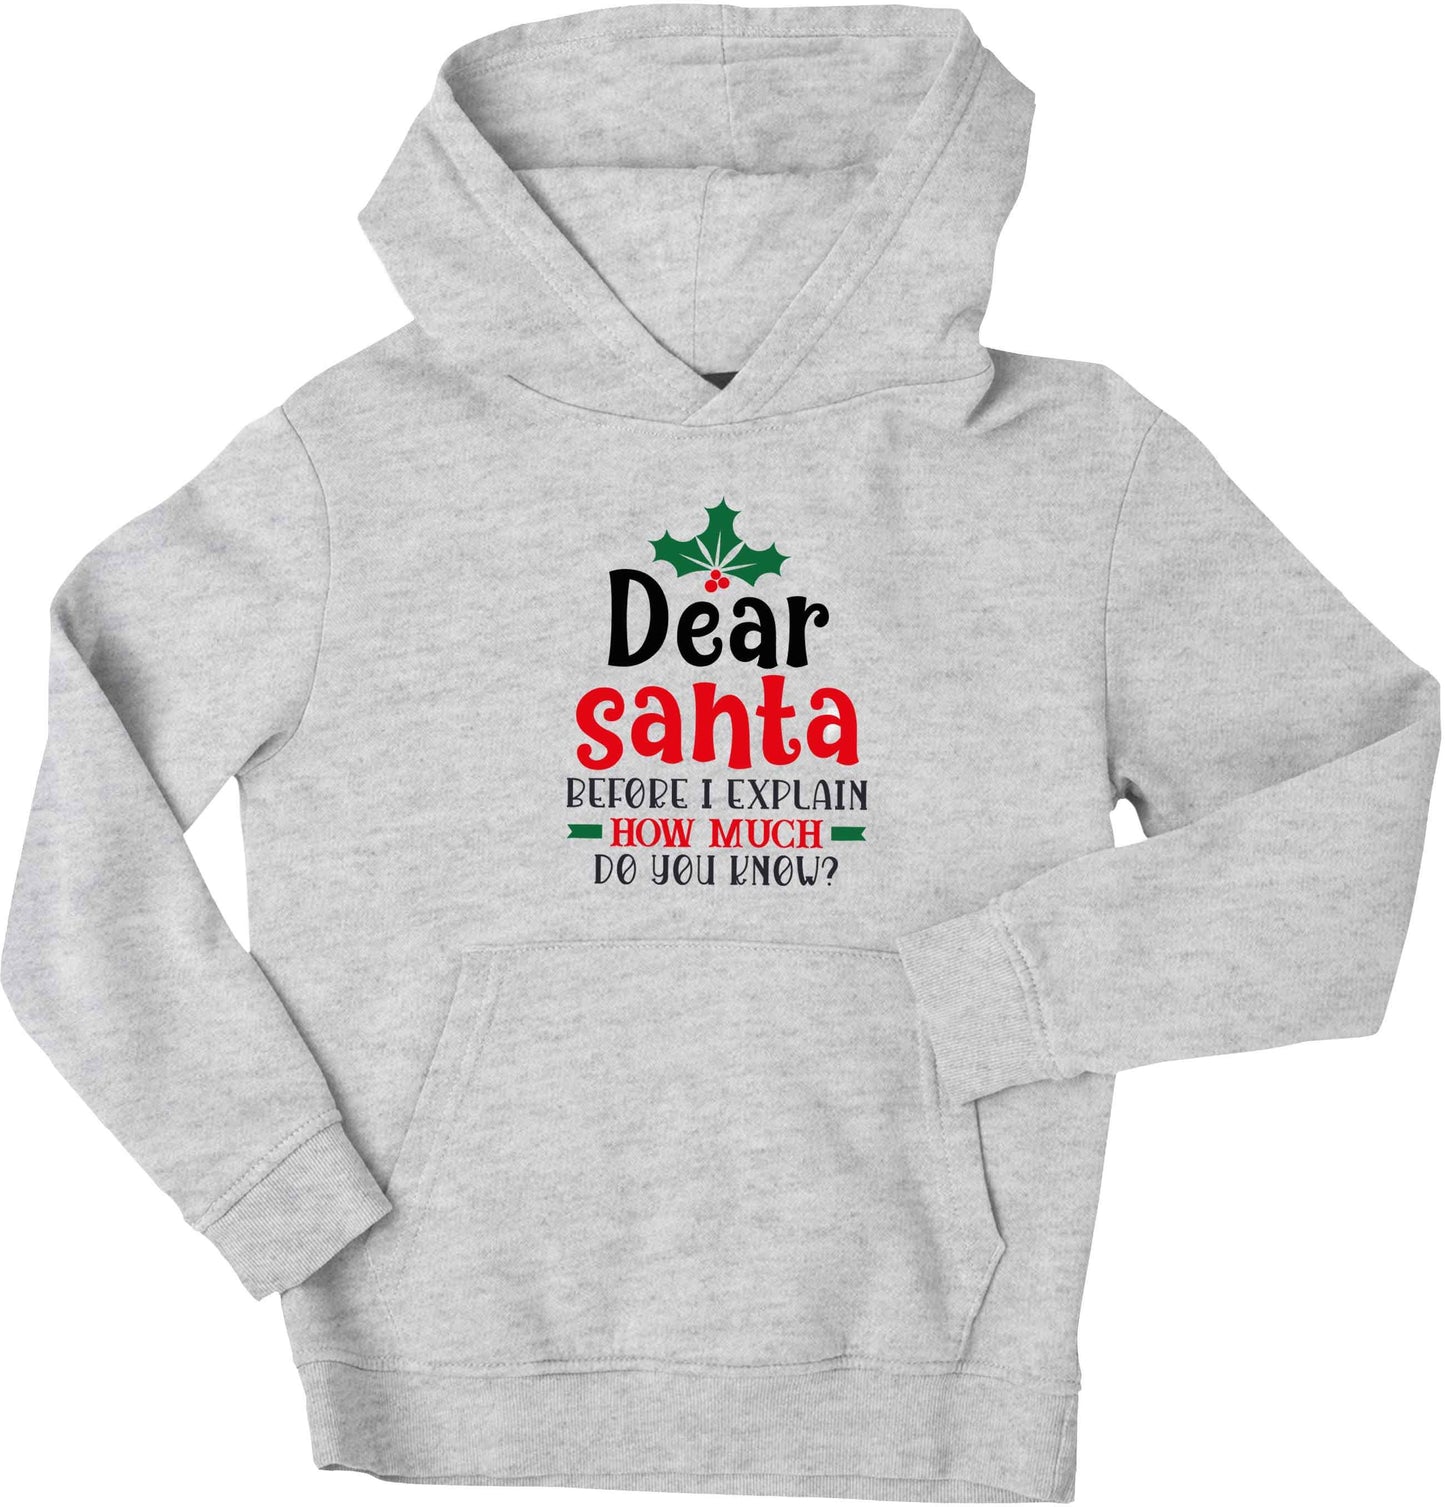 Santa before I explain how much do you know? children's grey hoodie 12-13 Years